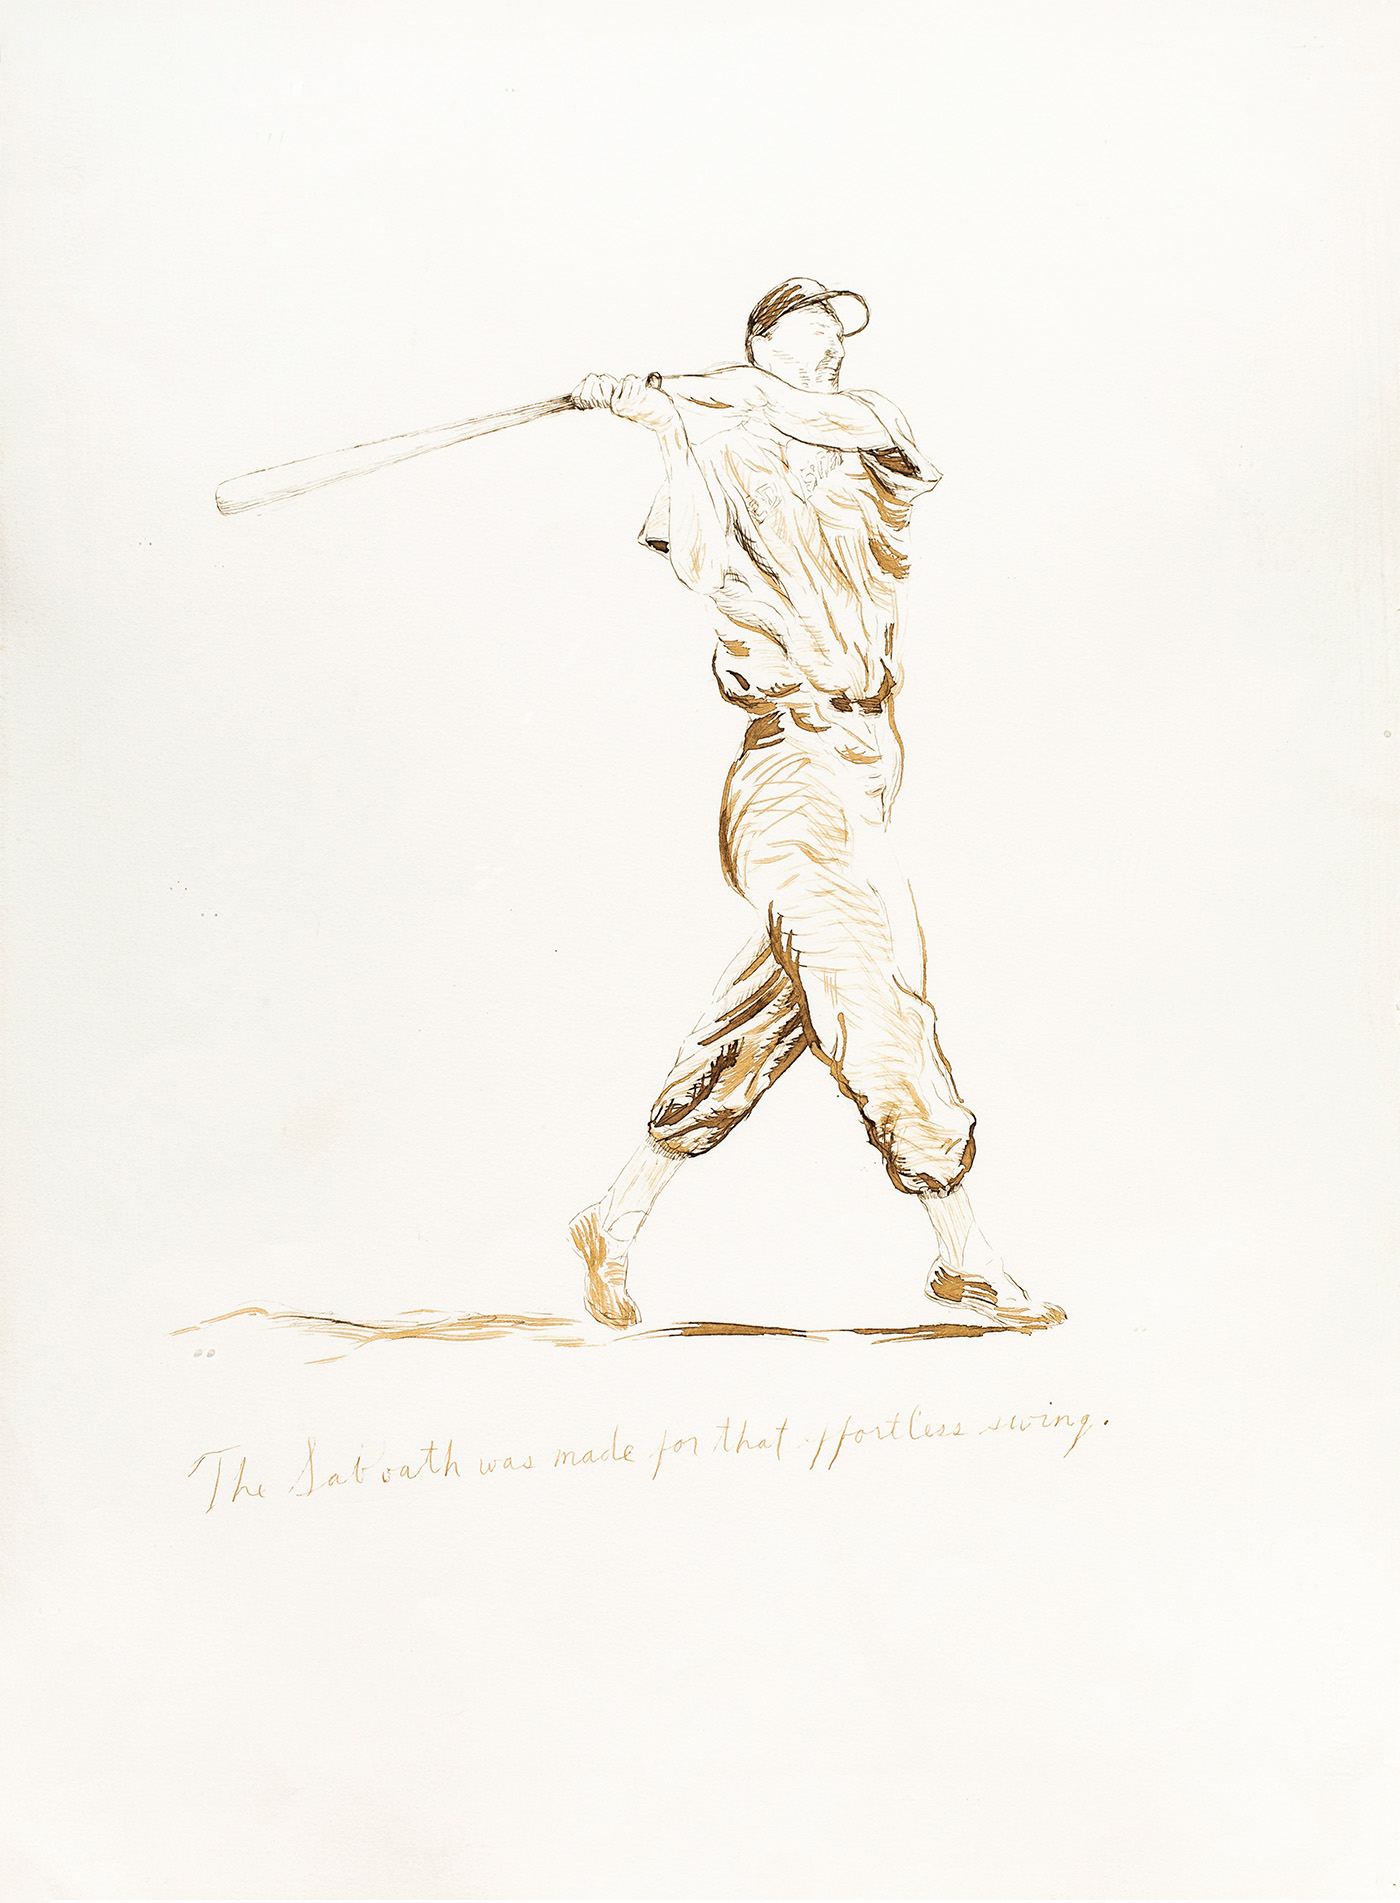 Raymond Pettibon, Untitled (The Sabbath Was Made For That Effortless Swing).